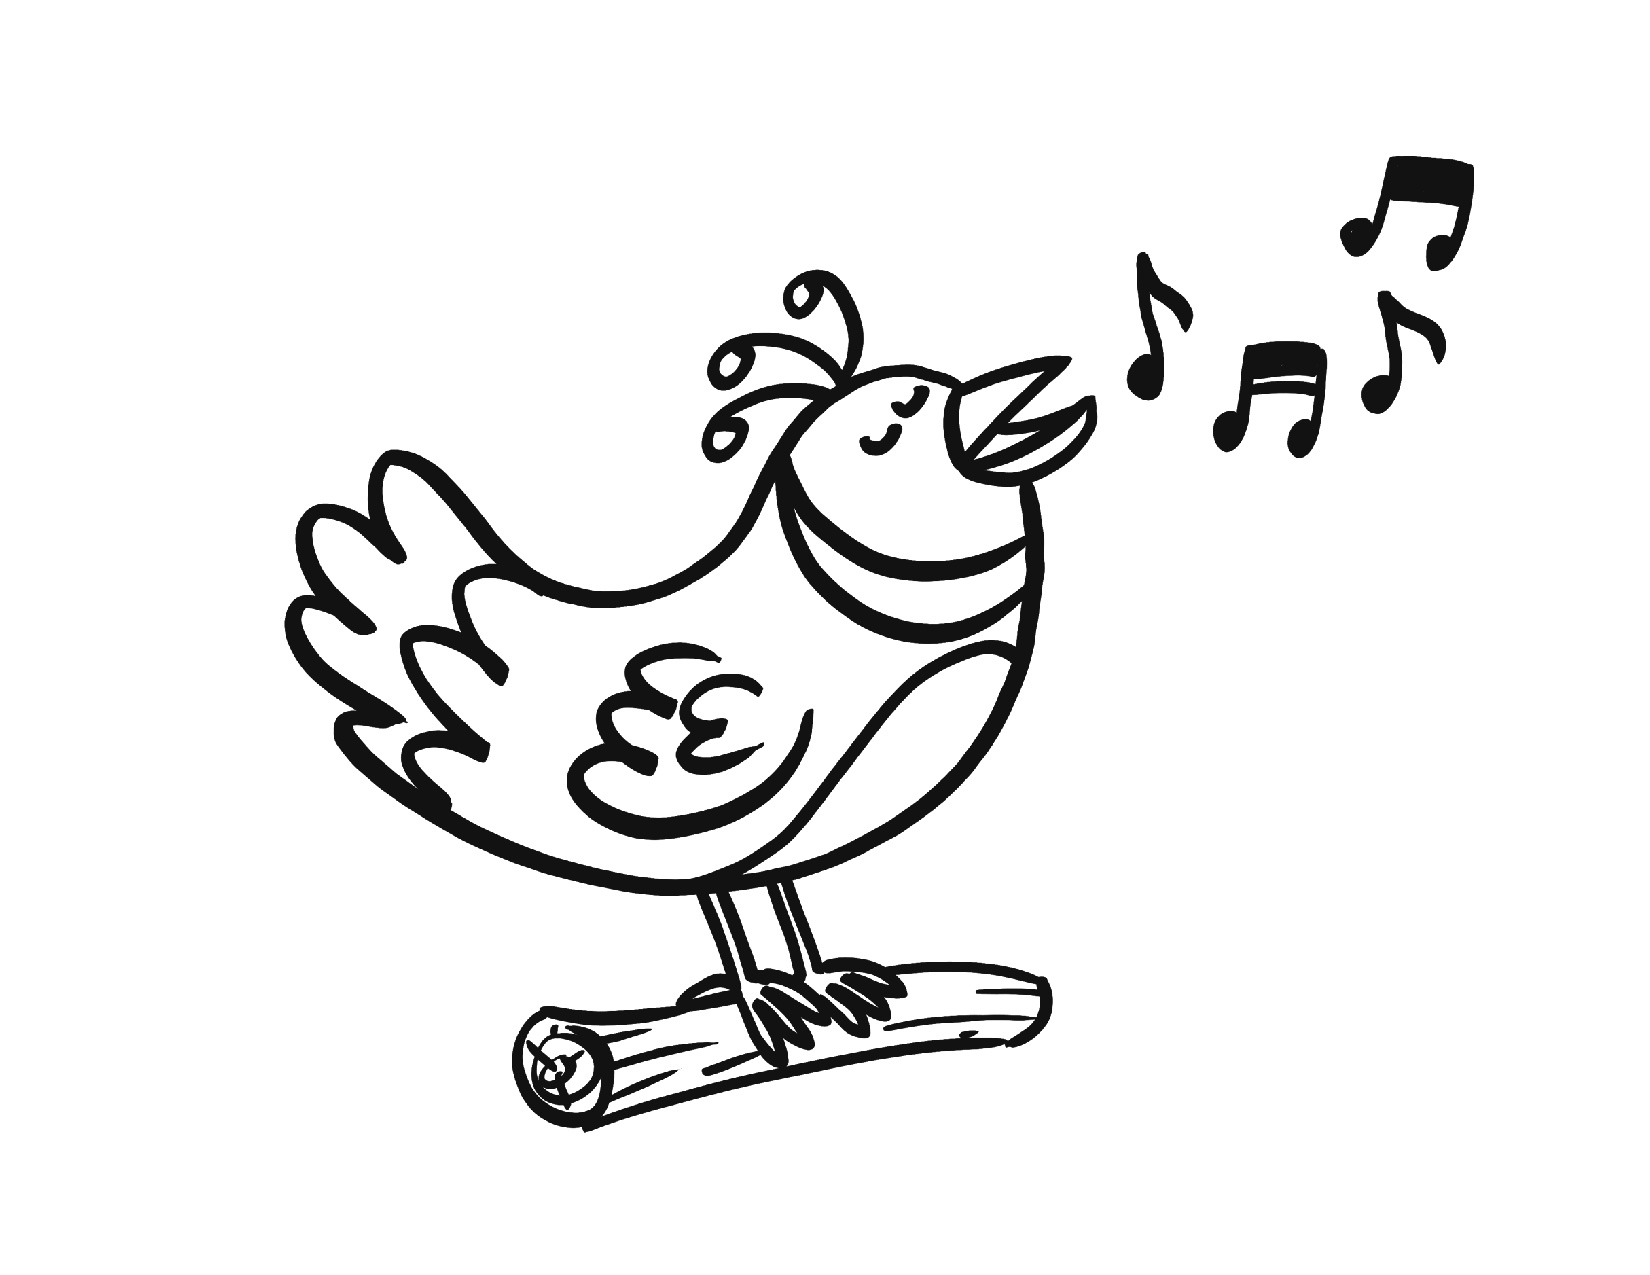 Coloring page of a bird singing